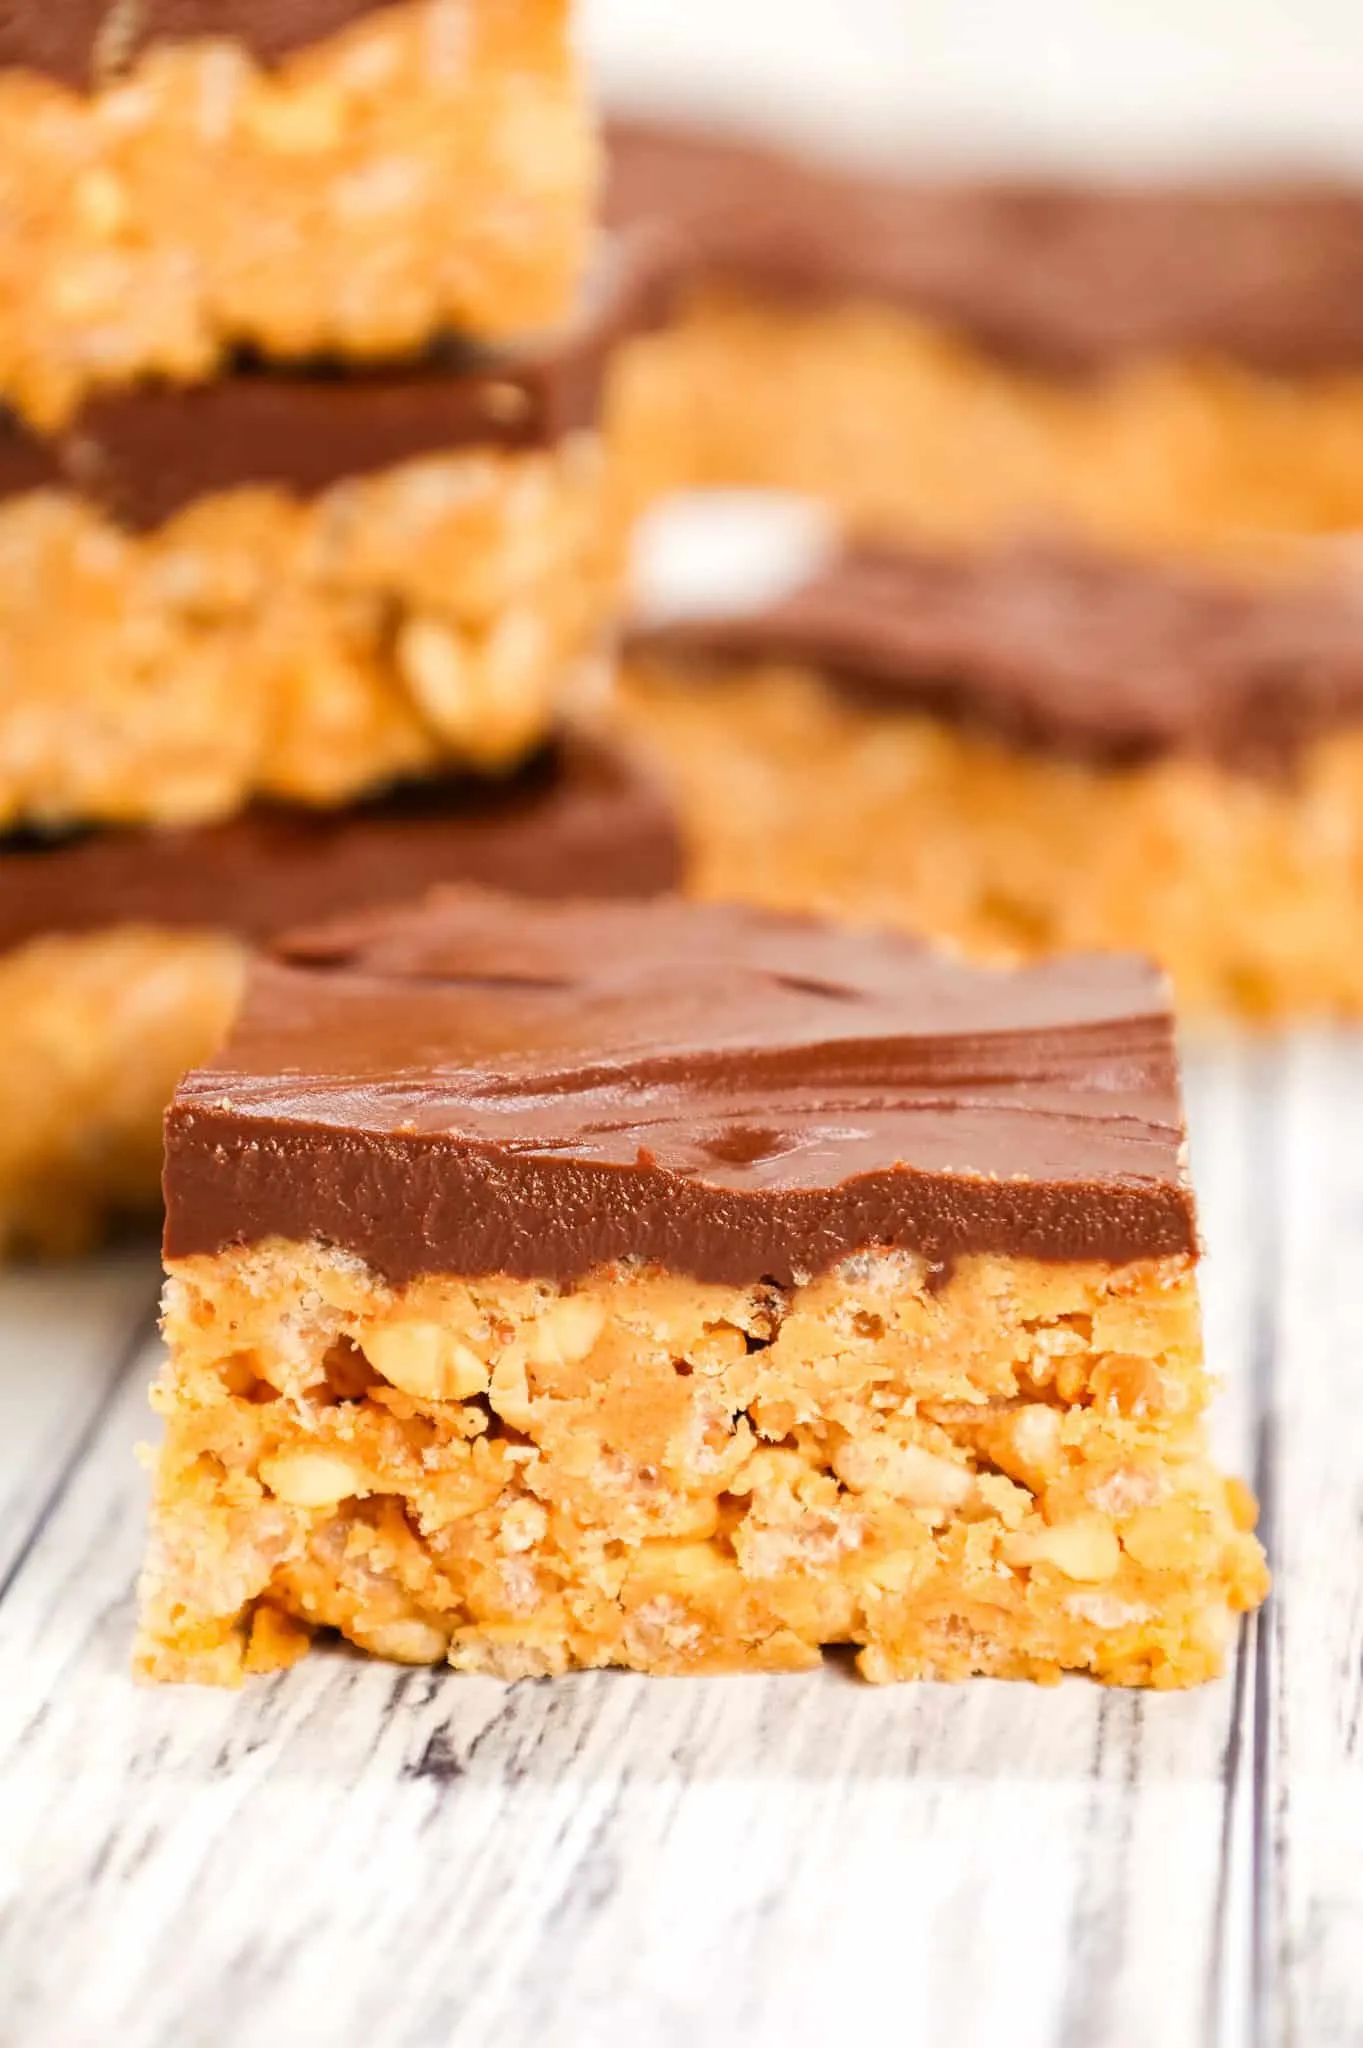 Peanut Butter Crunch Bars are an easy no bake dessert recipe made with base made from crunchy peanut butter, Rice Krispies, corn syrup, peanut butter baking chips and all topped with a layer of chocolate.